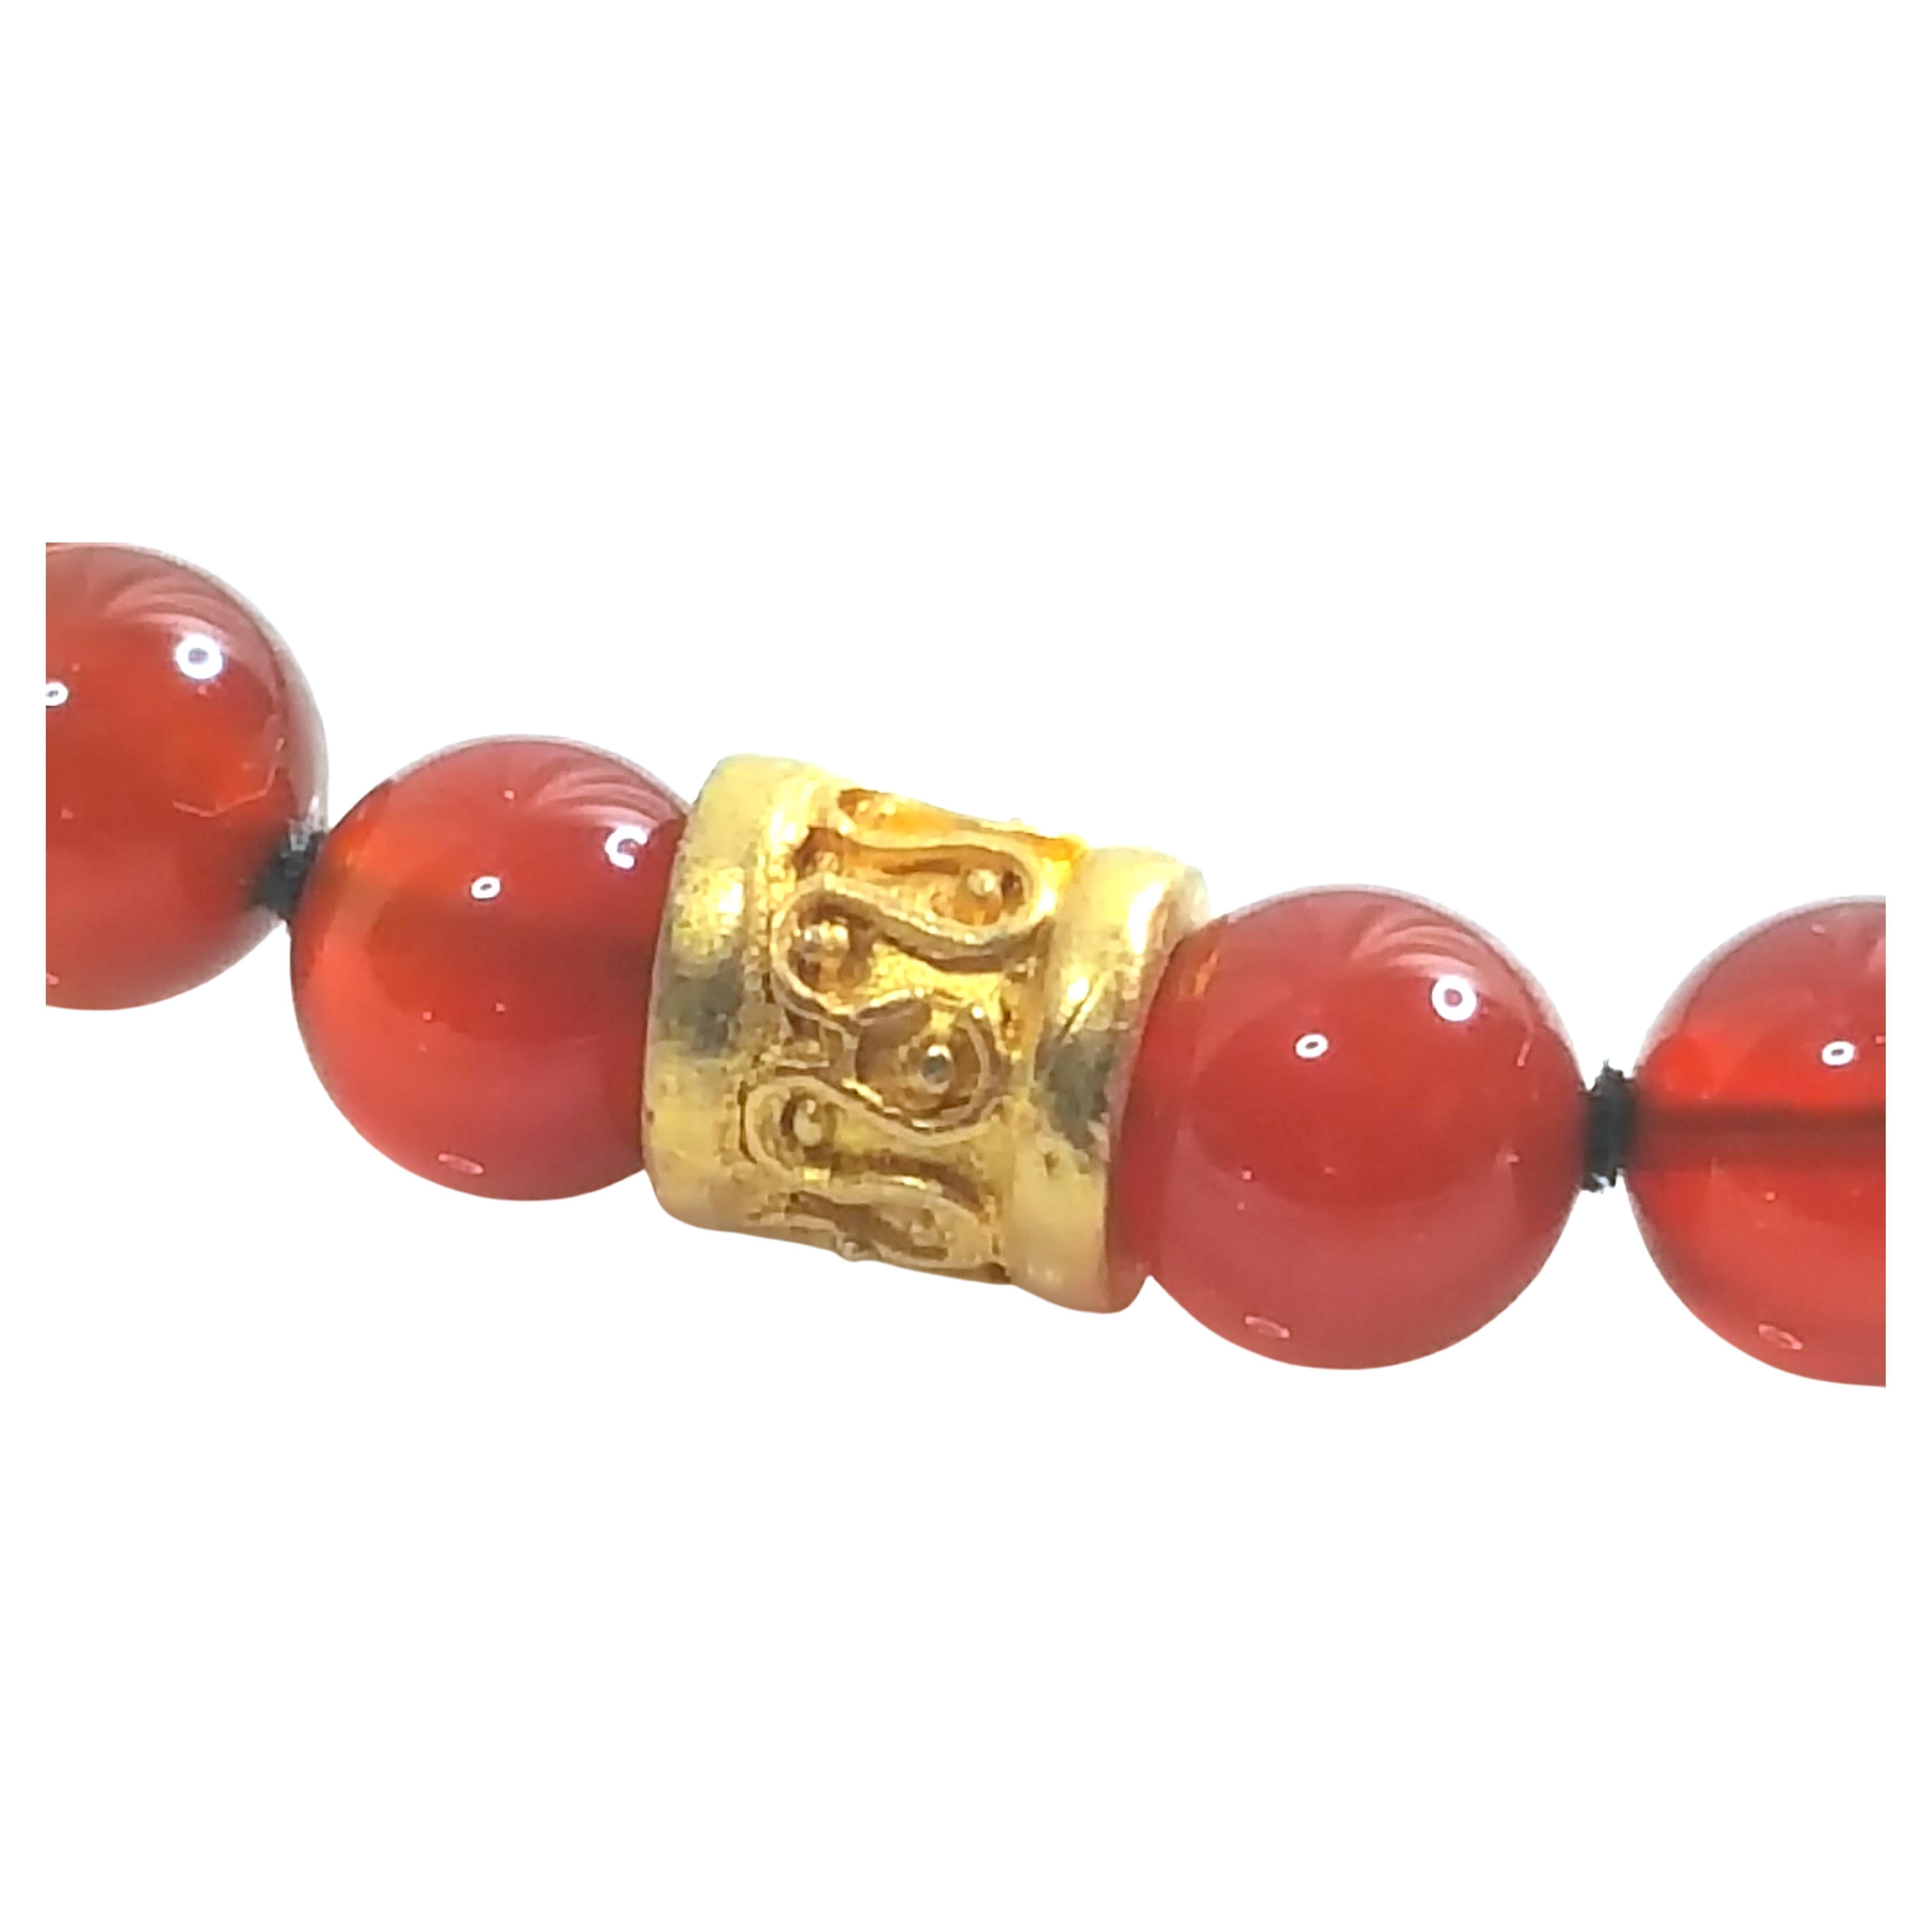 AncientRevival Gold MotifRondelles Carnelian Beads Knotted BlackSilk Necklace For Sale